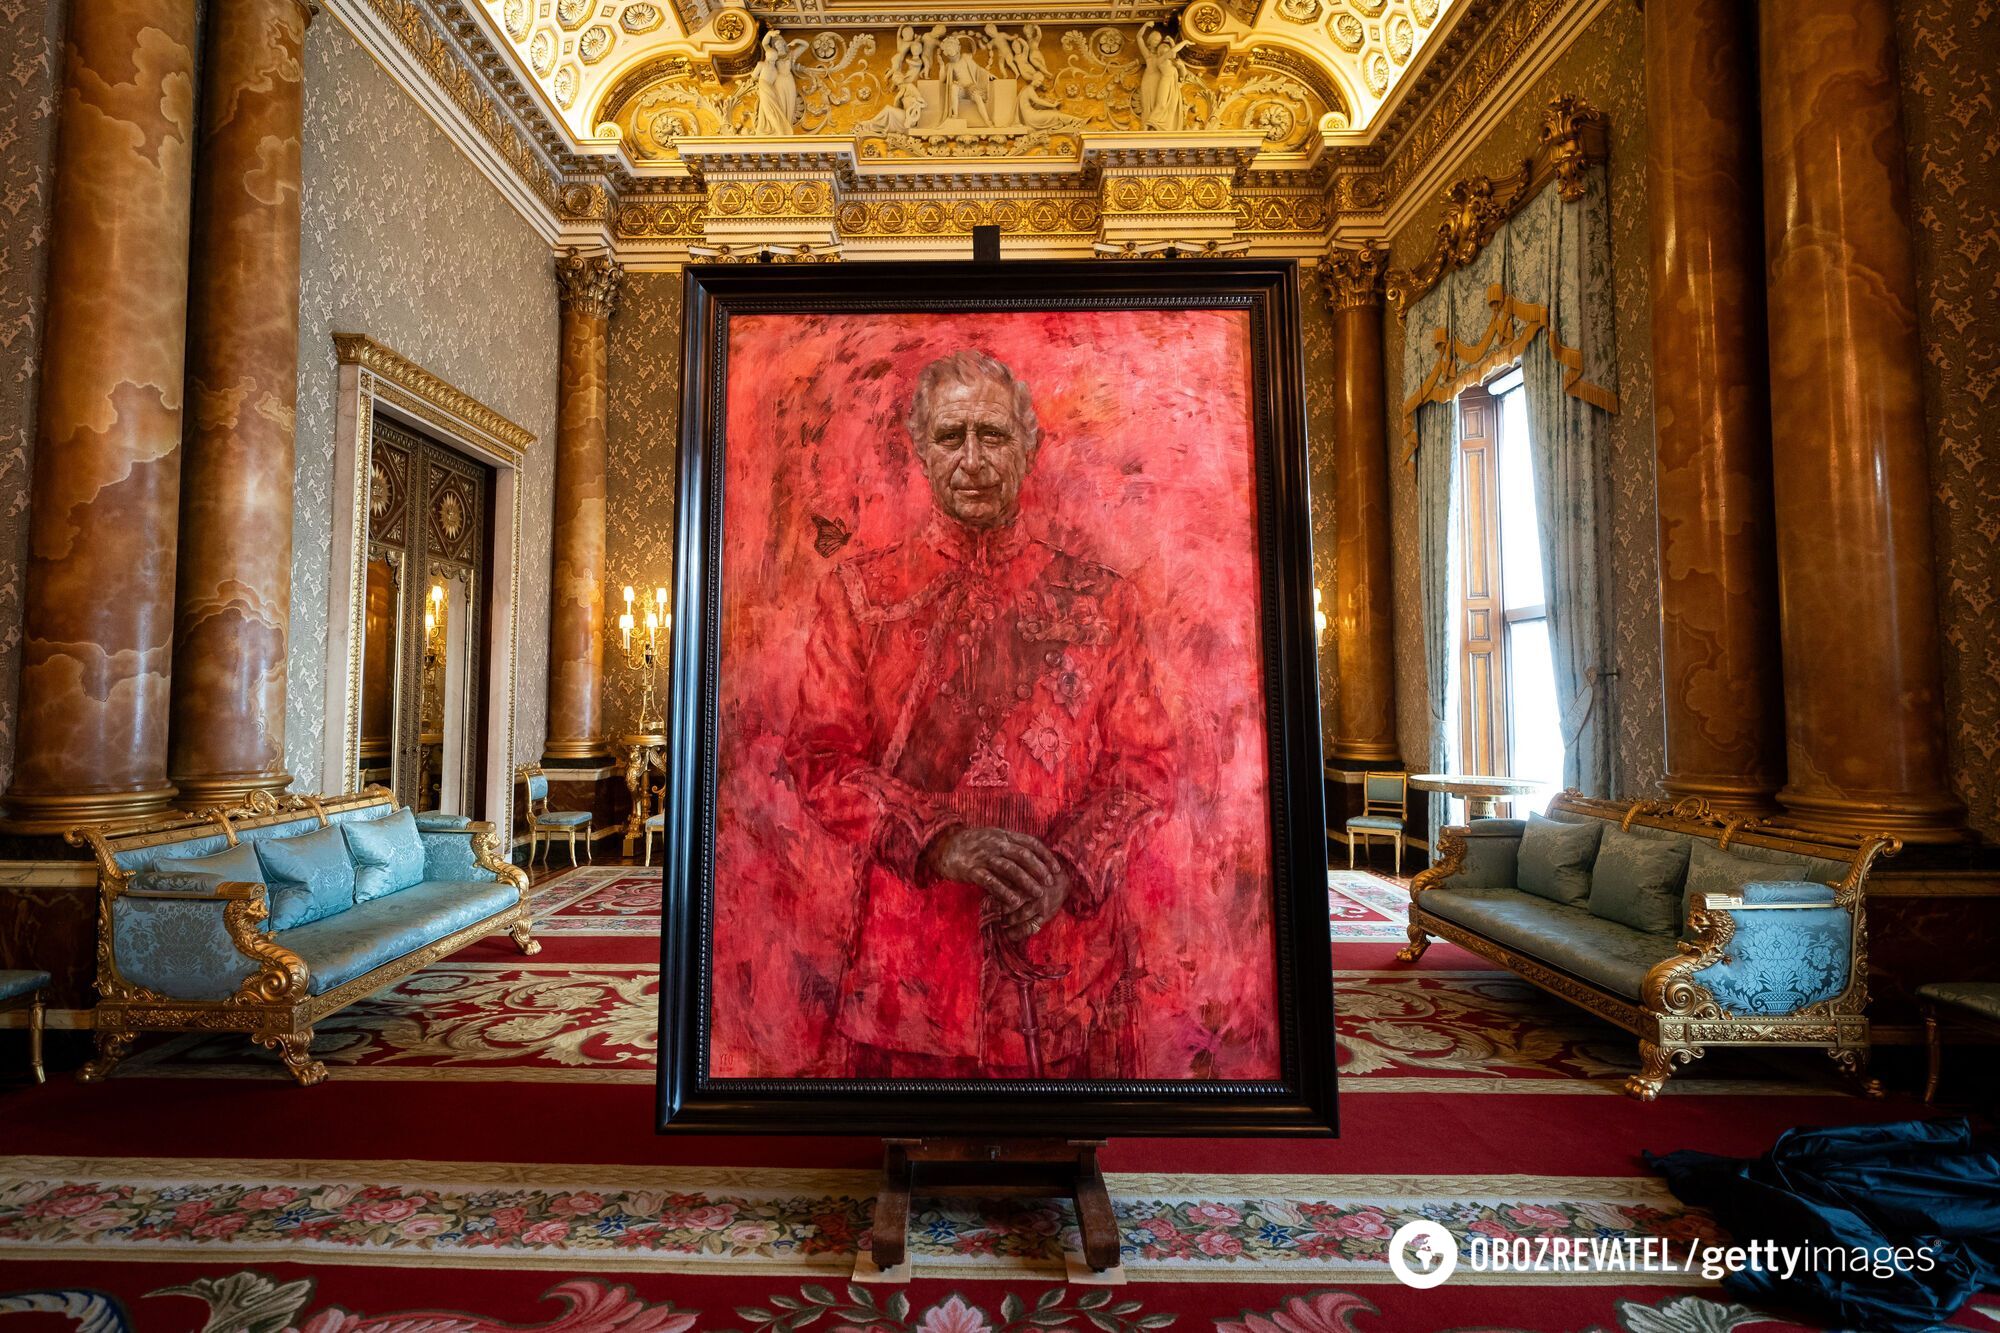 ''As if jam had been spilled'': the official portrait of King Charles sparked a discussion online. Photo